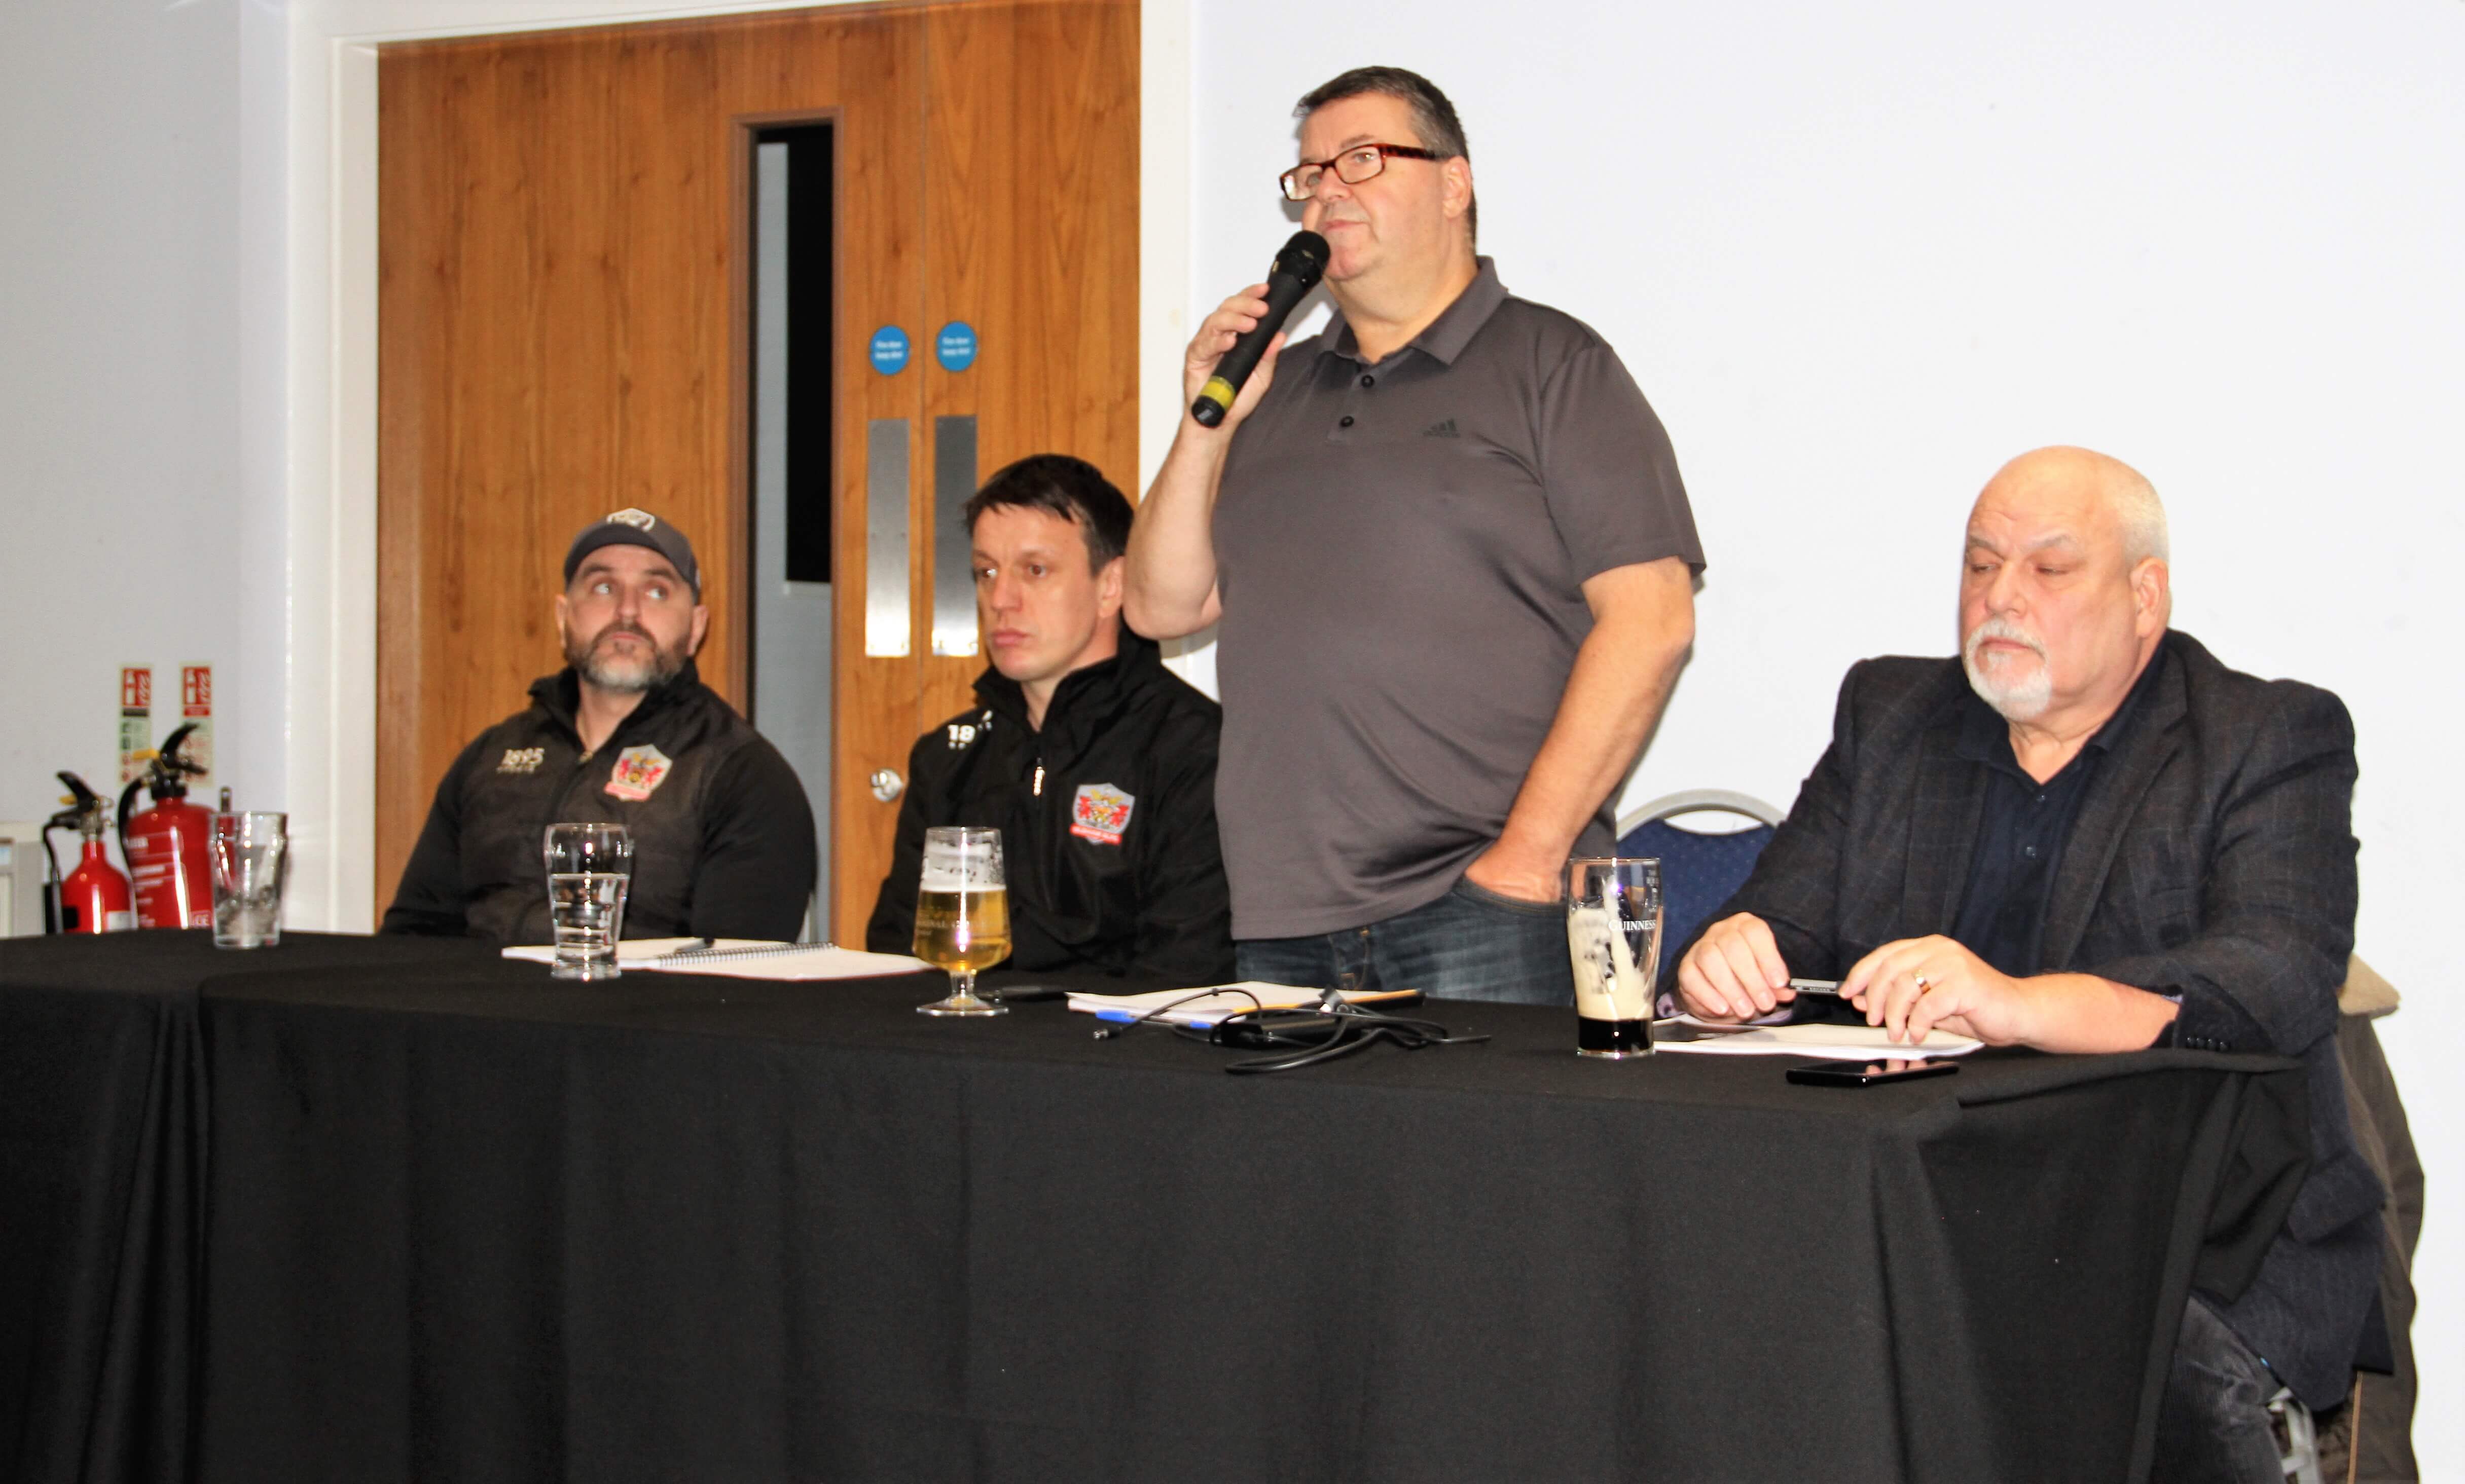 Chris Hamilton on the mic, flanked by John Roddy (to his left) and Stuart Littler and Brendan Sheridan to his right